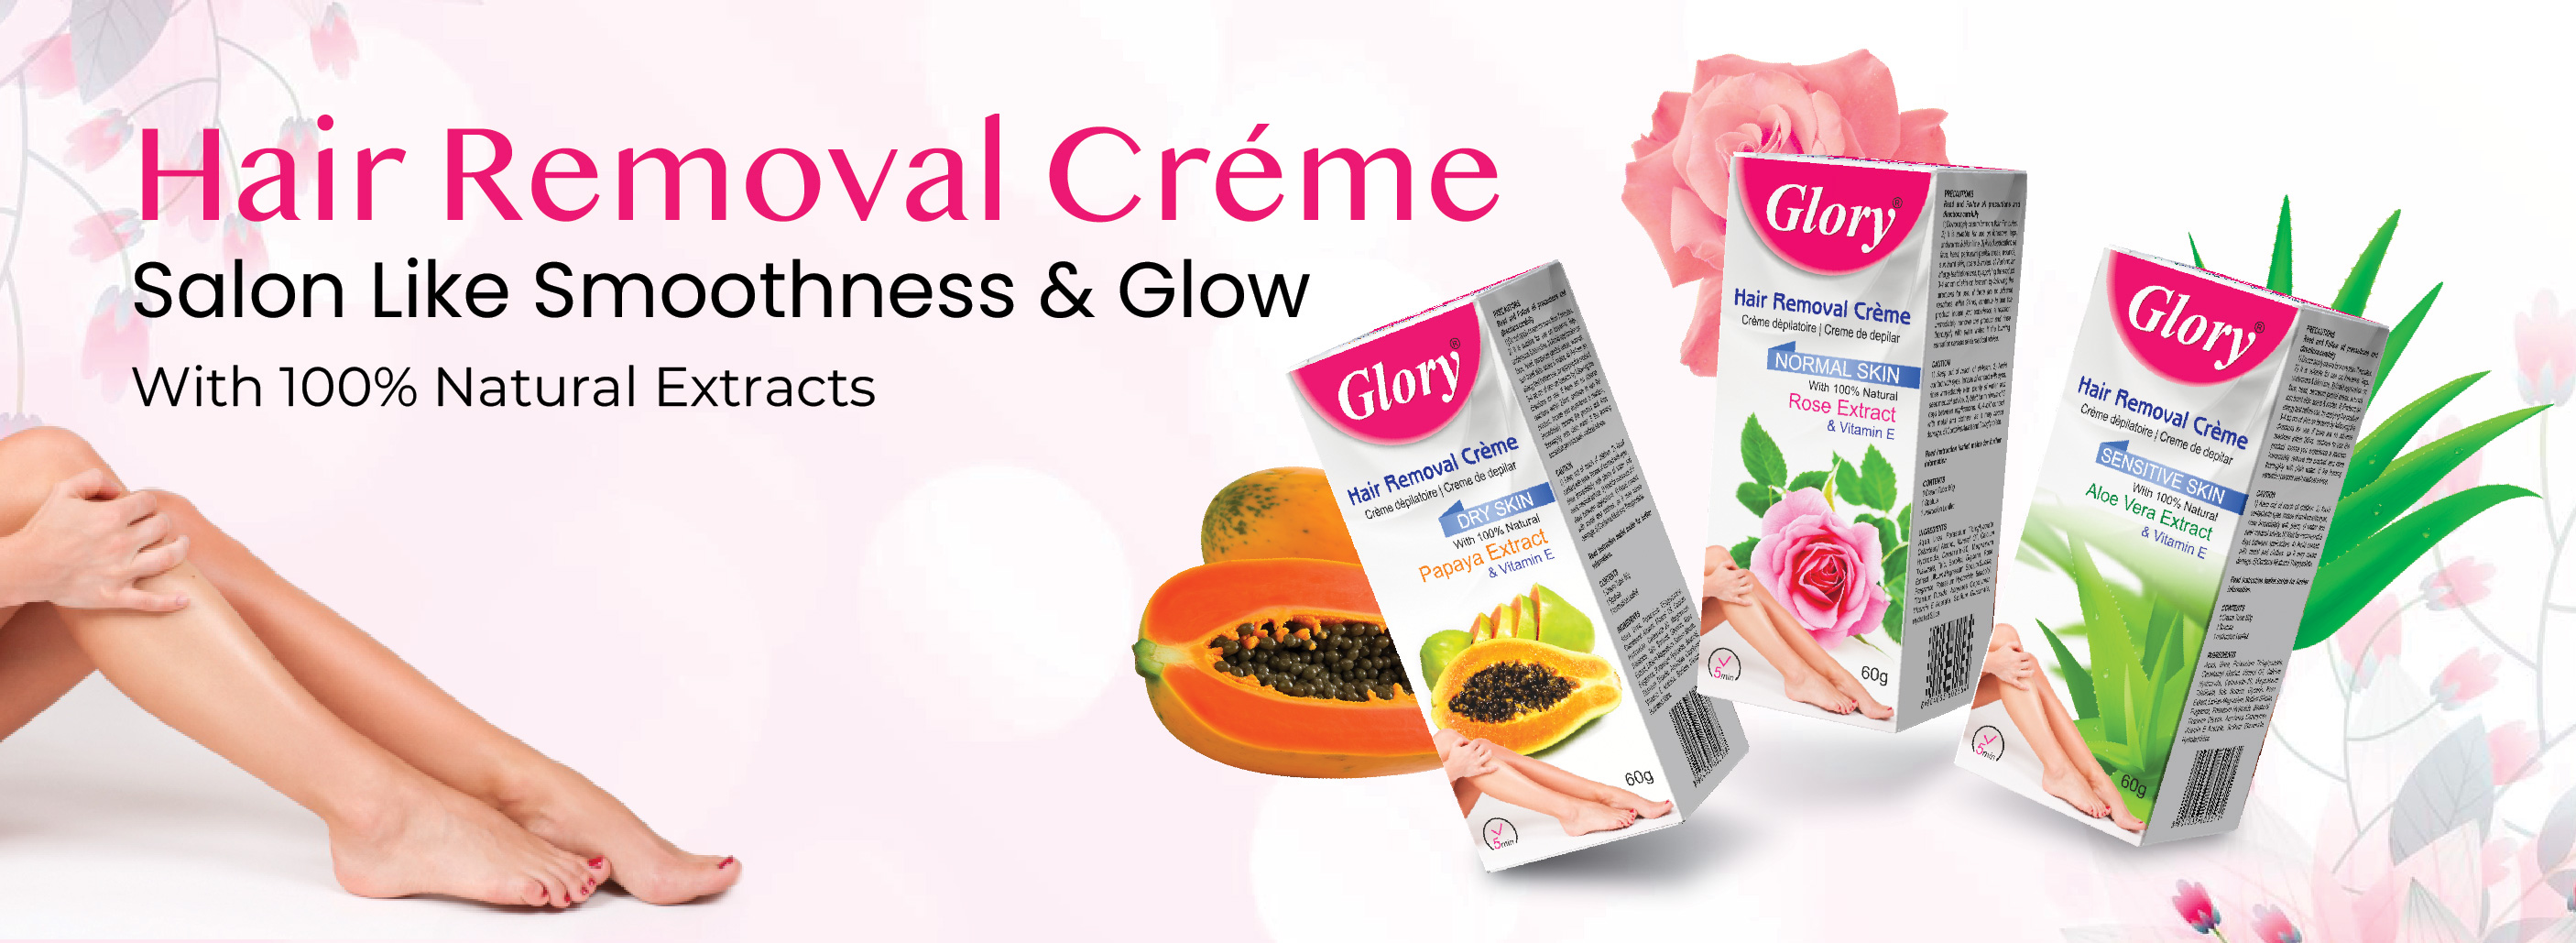 Hair Removal Creme Manufacturer | Hair Removal Creme Manufacturer in Zambia